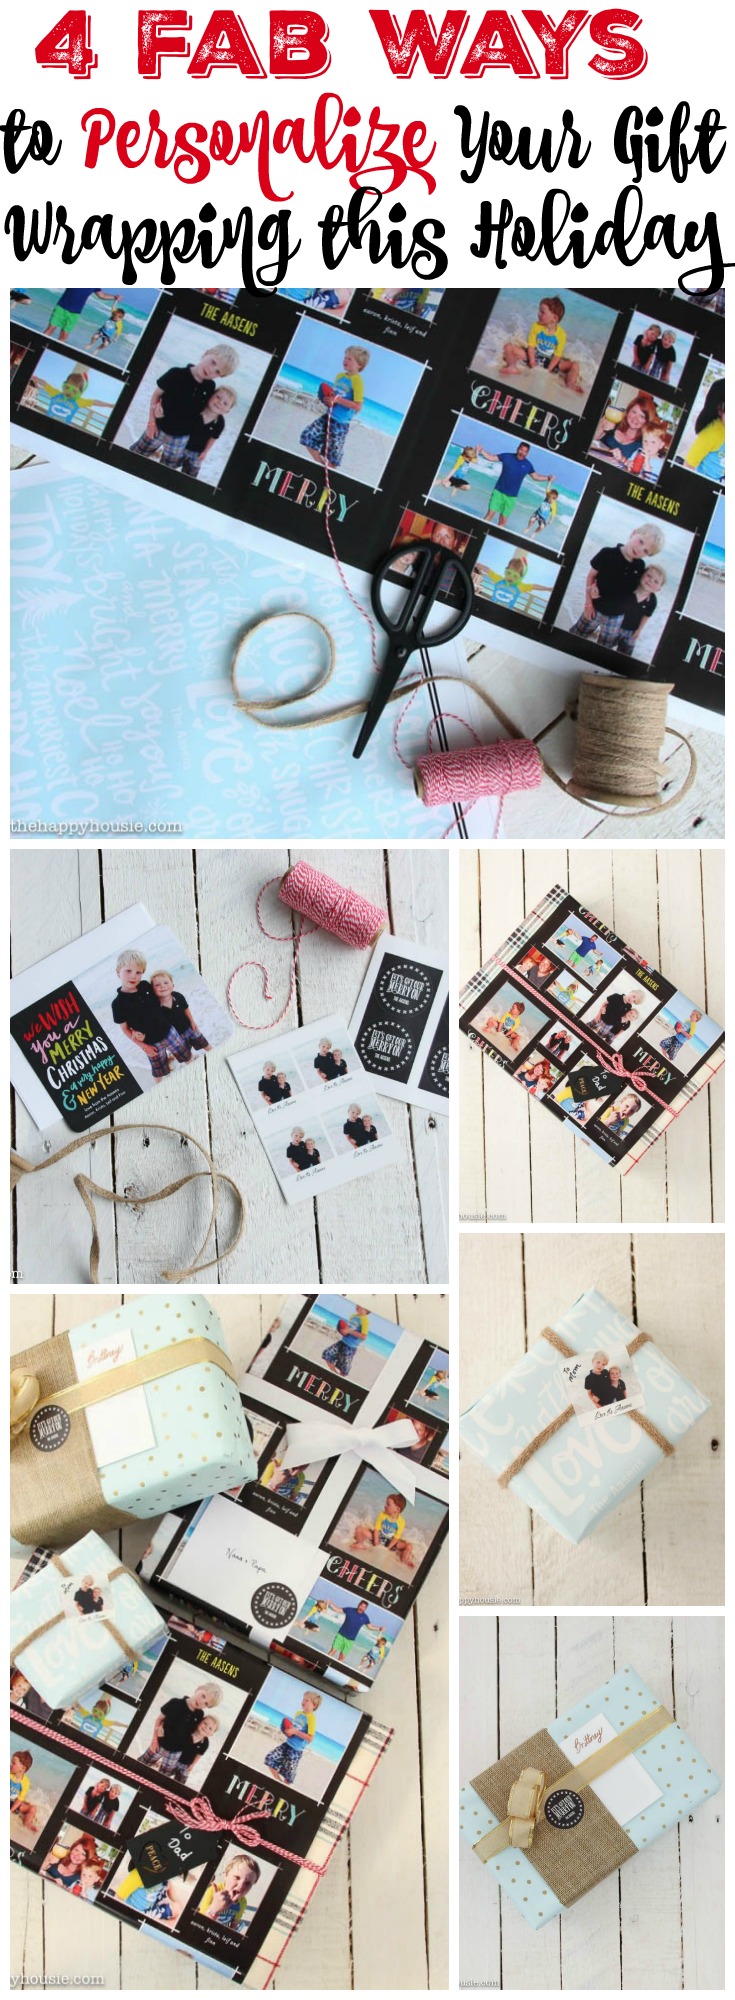 4 Fab Ways to Personalize Your Gift Wrapping this Holiday poster.